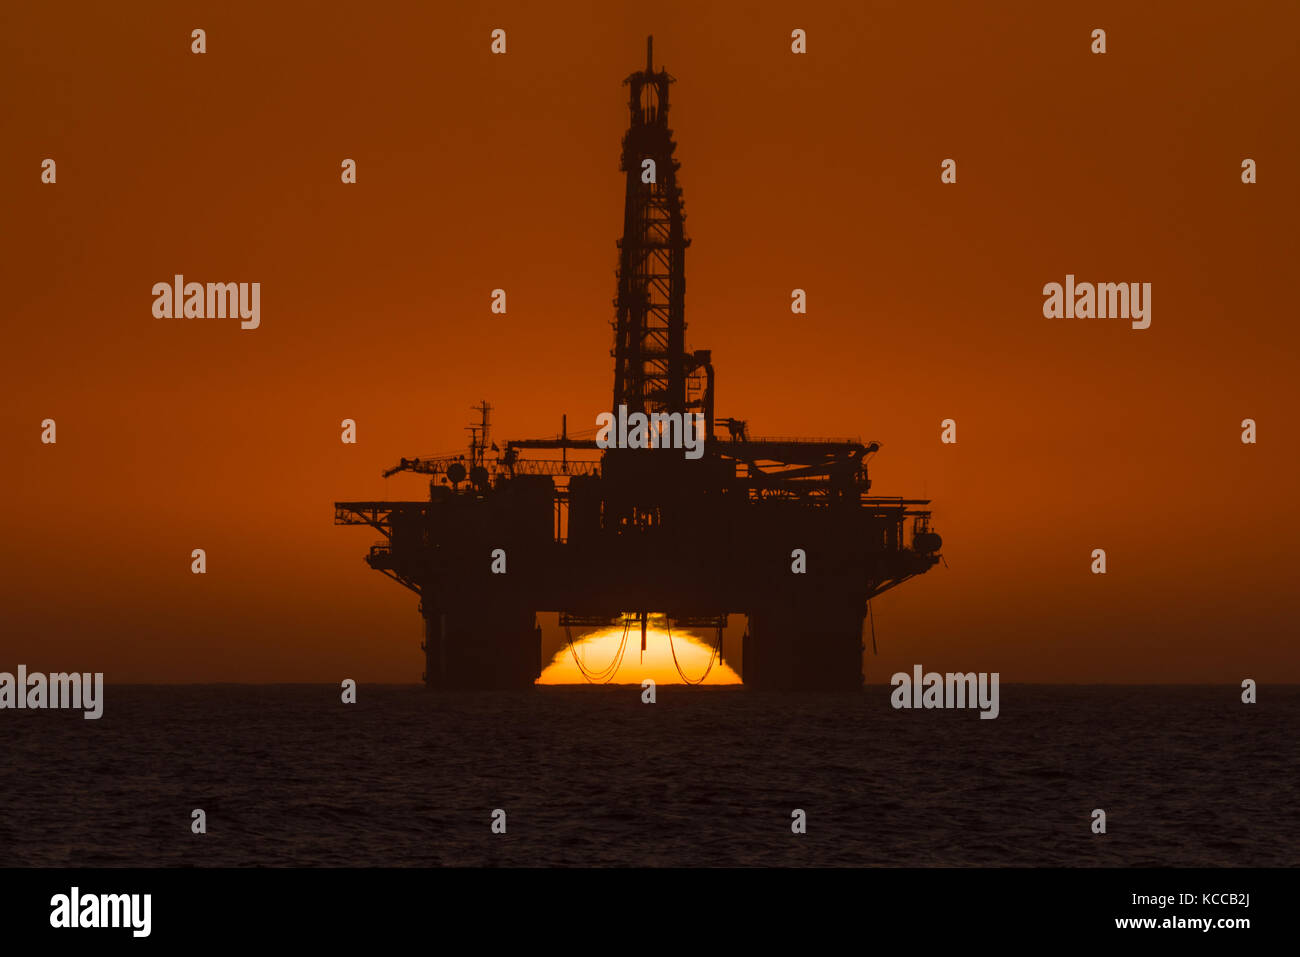 The sun is setting behind an oil drilling platform anchored in the Atlantic Ocean at Longbeach in the Namib Desert of Namibia Stock Photo